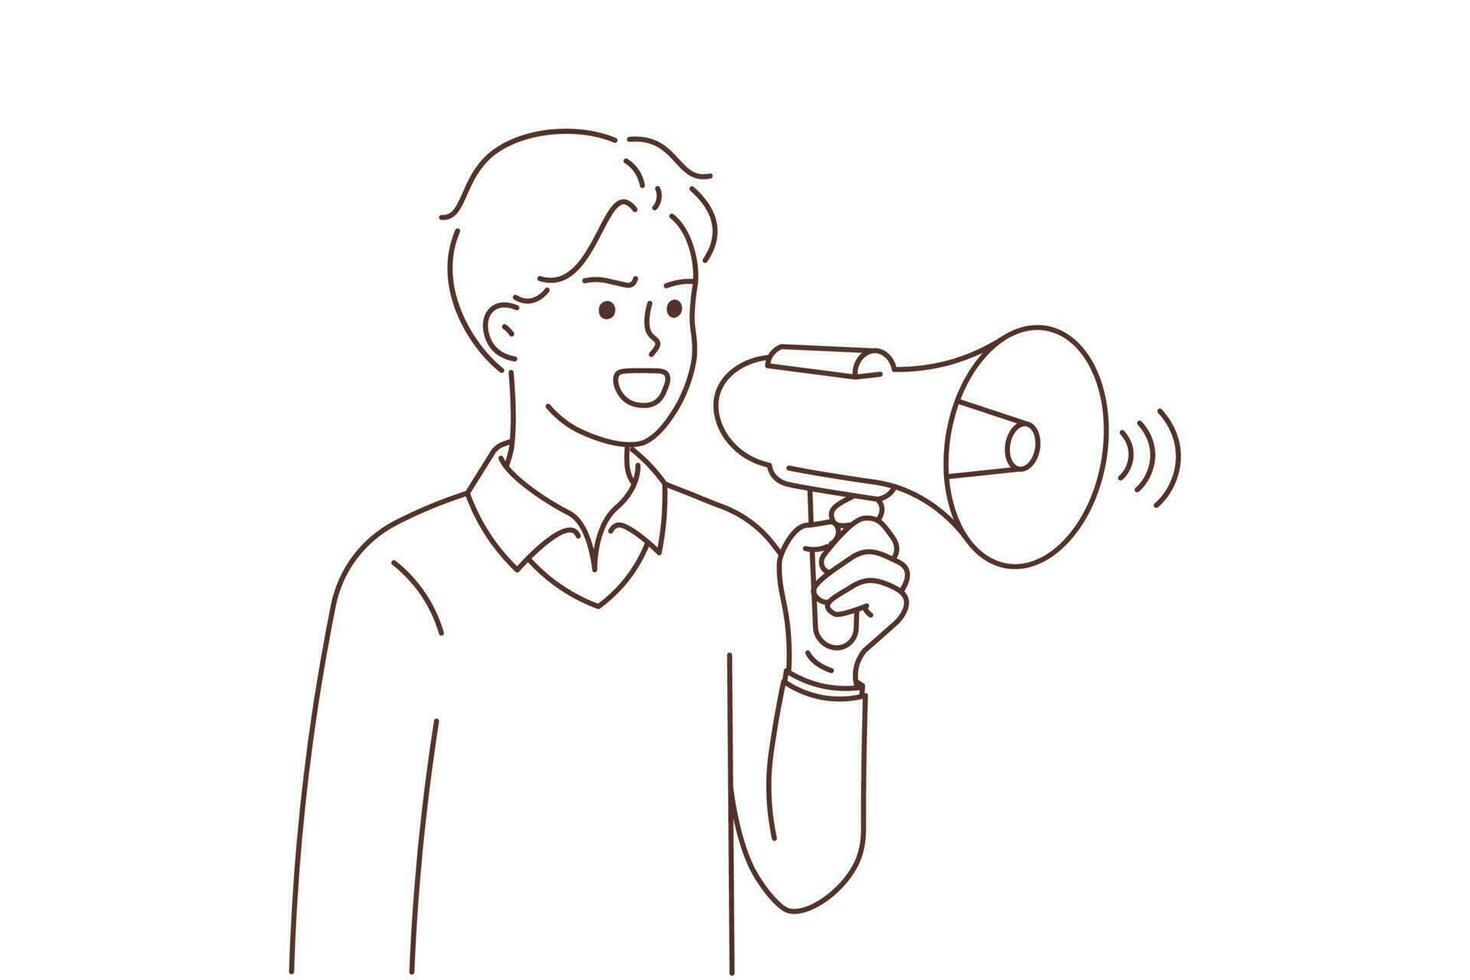 Young man with loudspeaker scream on protest or demonstration. Furious businessman shout in megaphone speak loud to audience. Vector illustration.